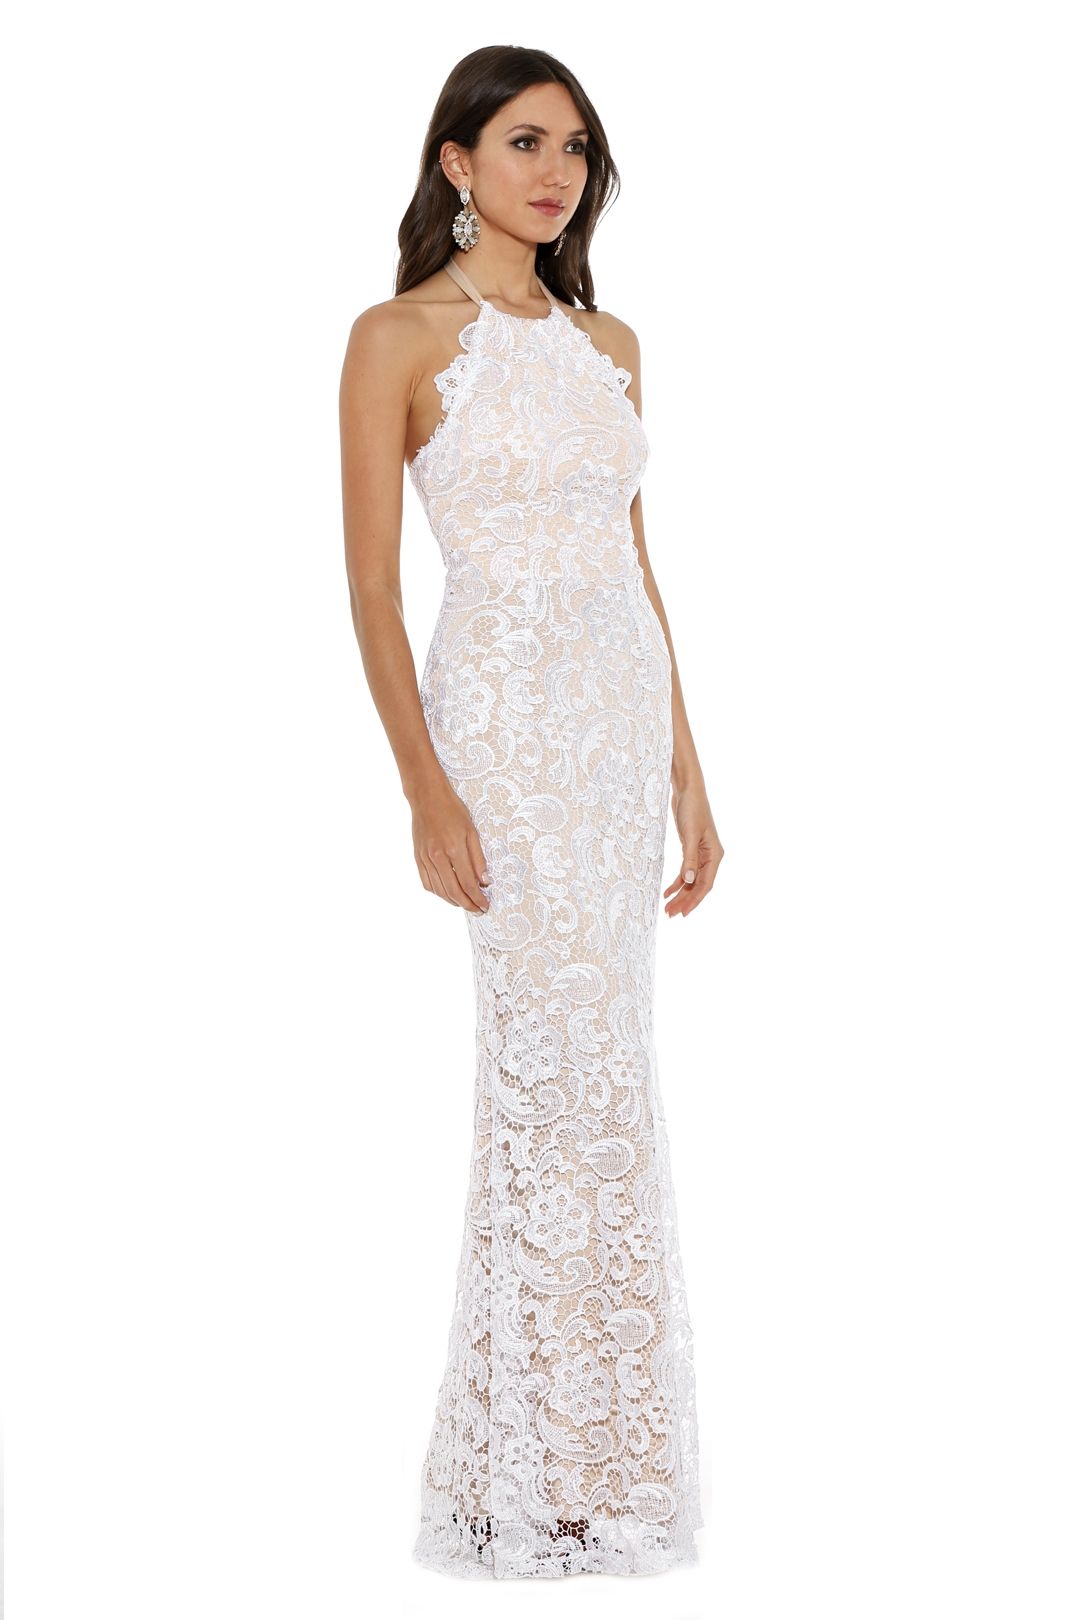 Langhem - Leila White and Nude Evening Gown - White - Side